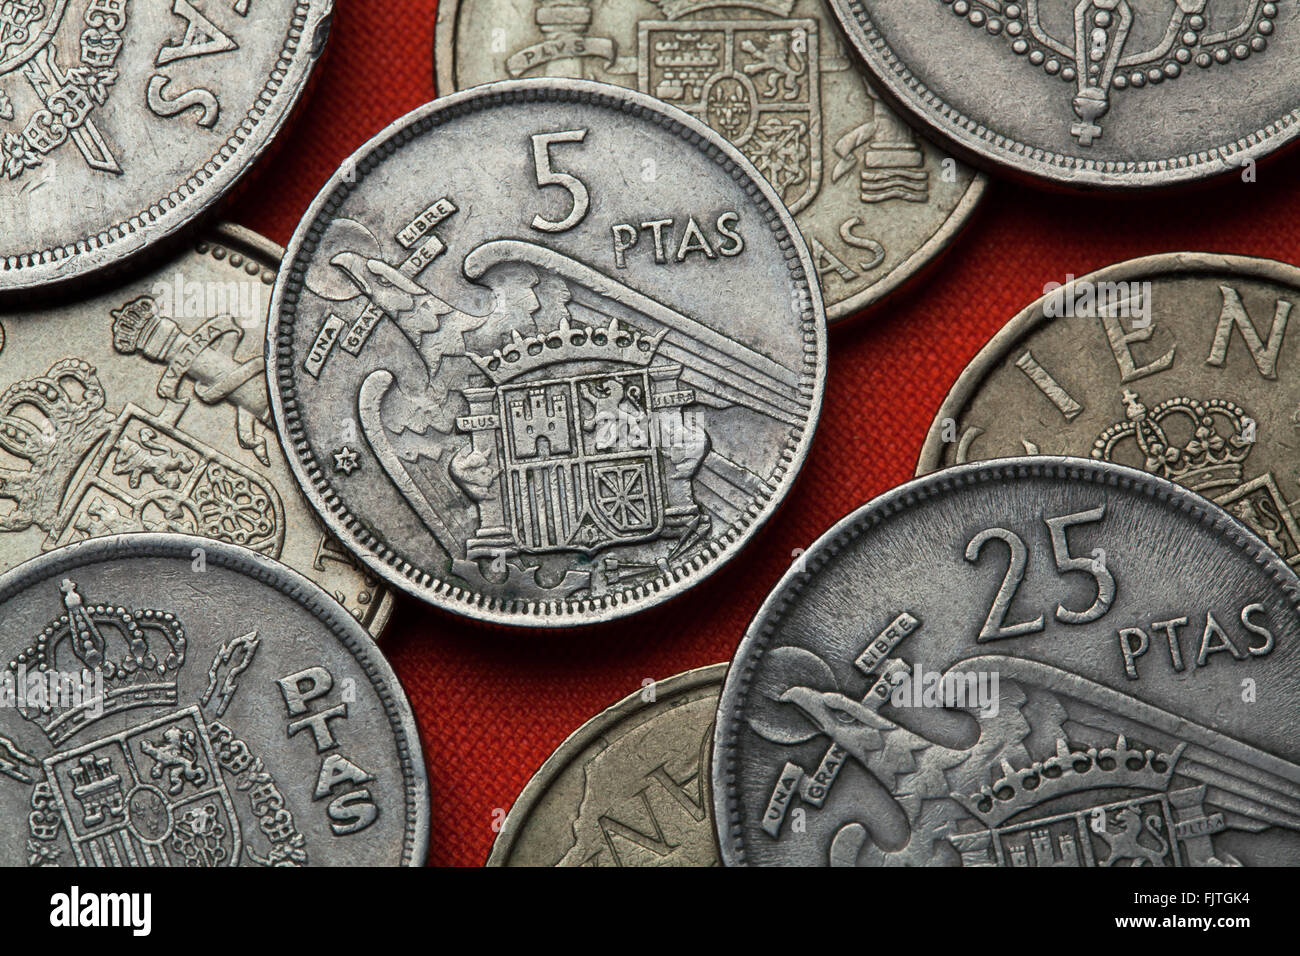 Coins of Spain. Coat of arms of Spain under Franco depicted in the Spanish five peseta coin (1957). Stock Photo